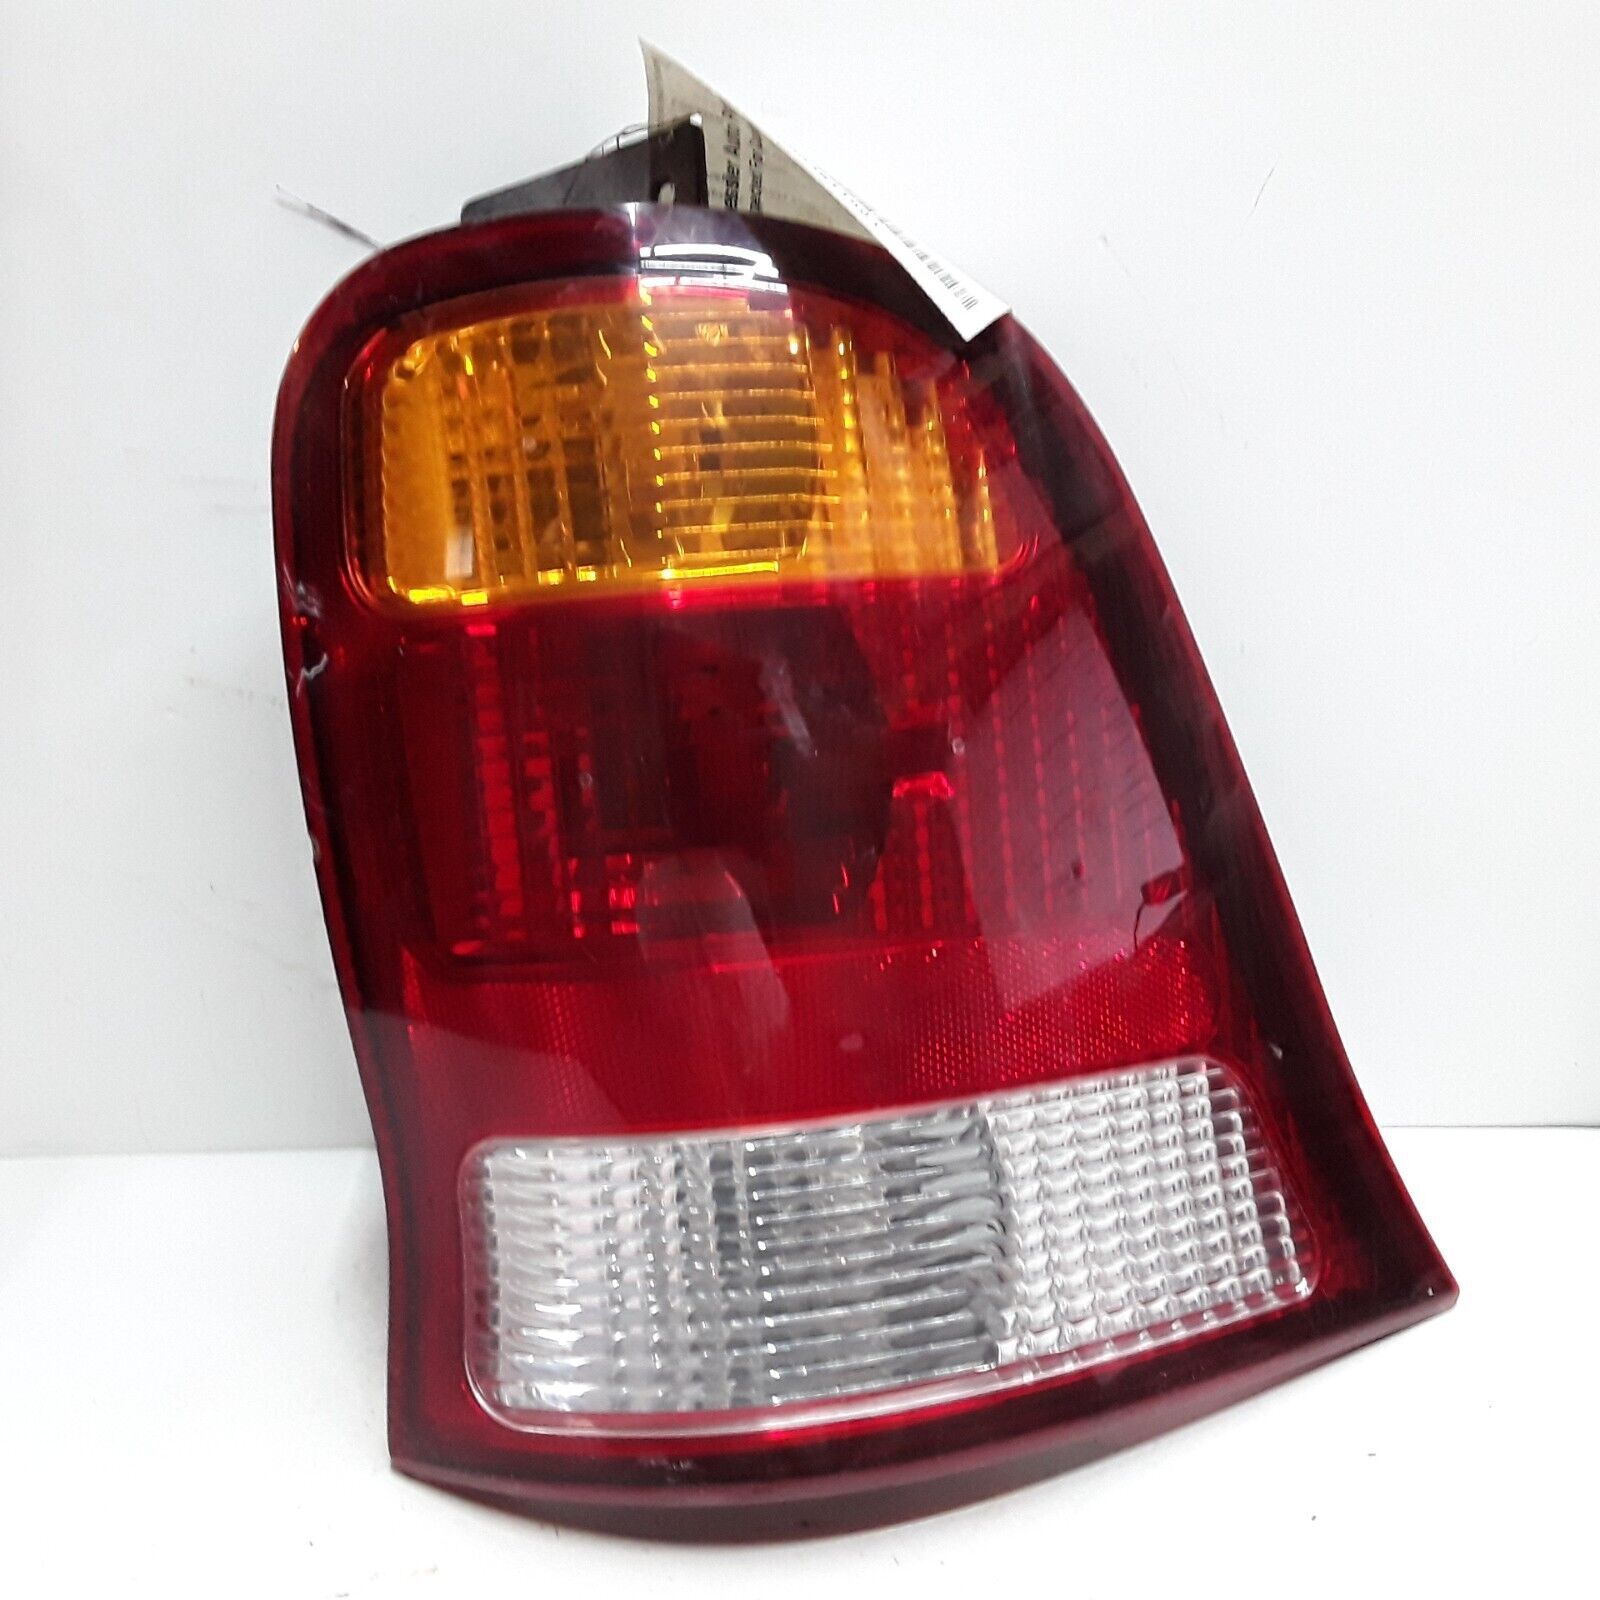 Primary image for 99 00 01 02 03 Ford Windstar right passenger tail light assembly OEM YF22-13B504